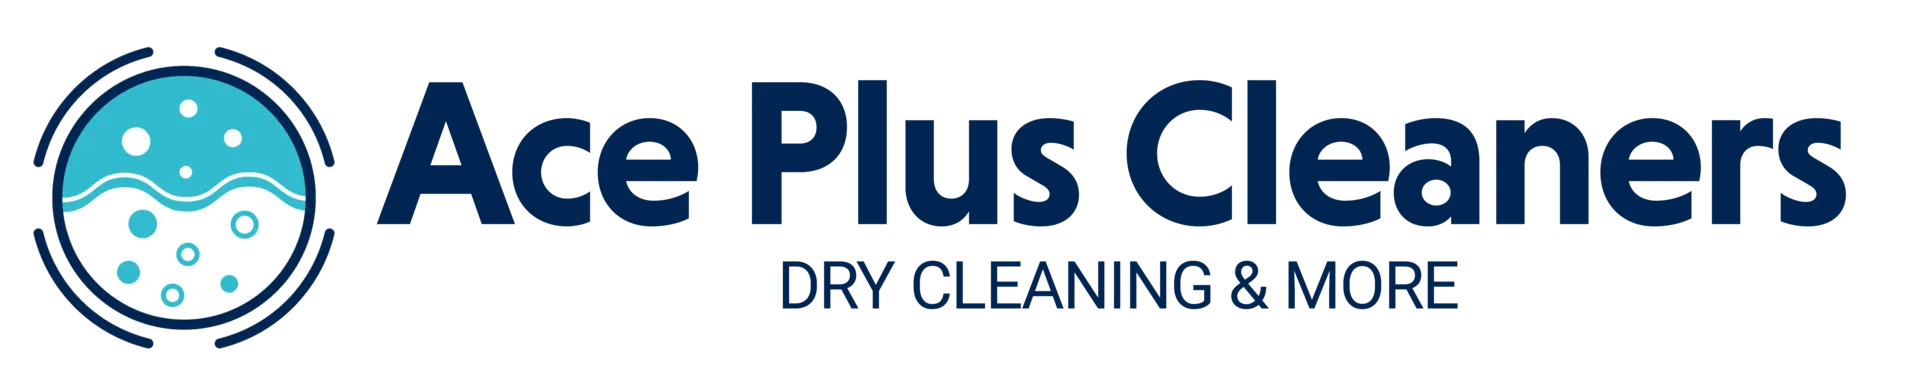 Ace Plus Cleaners